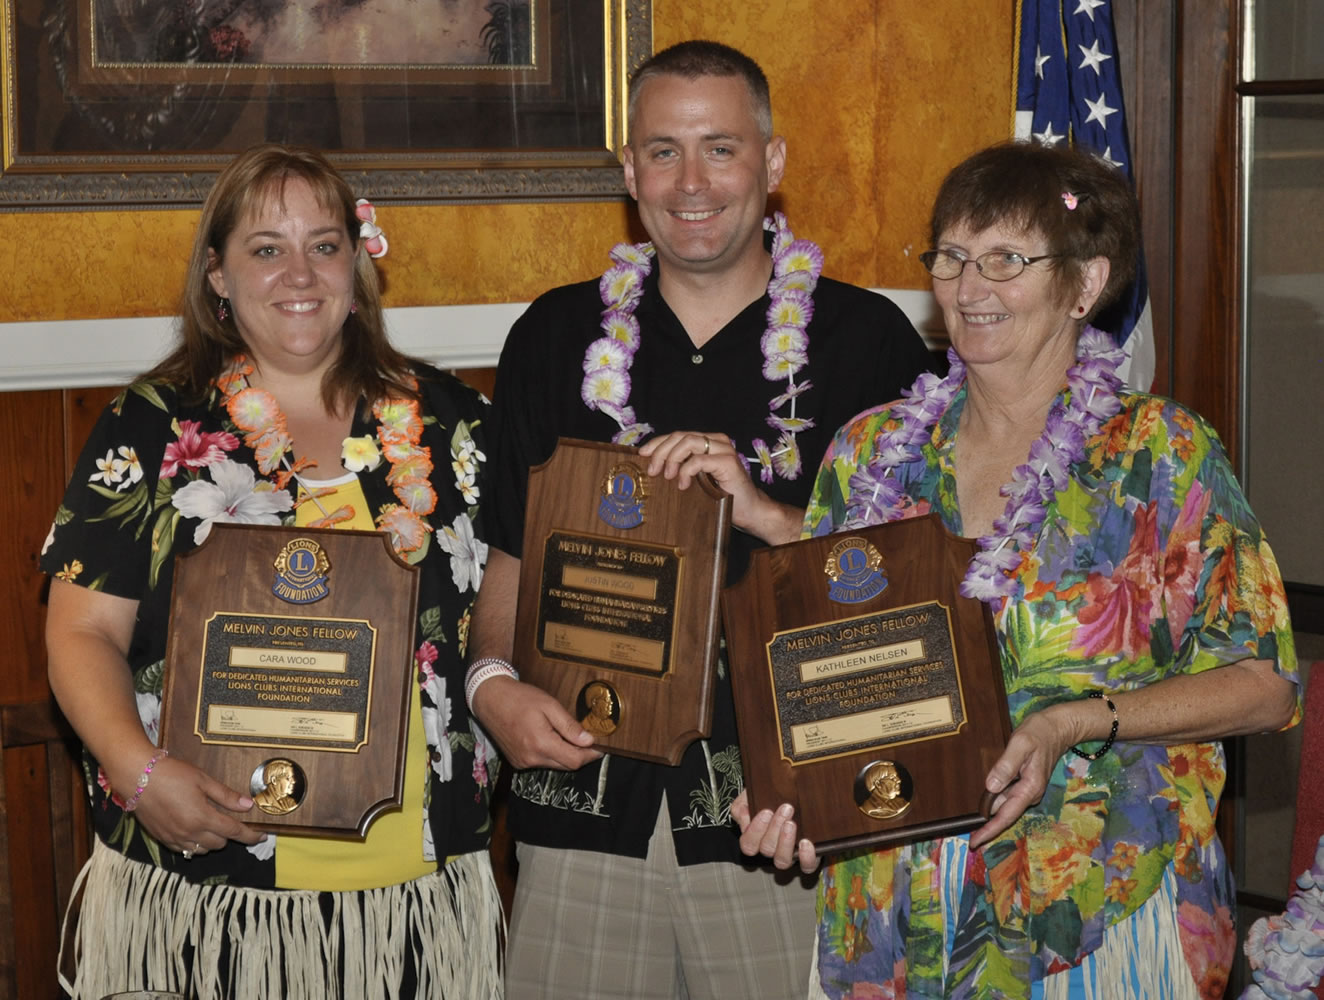 Hazel Dell: Cara Wood, Justin Wood and Kathy Nelson were honored as Melvin Jones Fellows, the highest recognition a Lion can receive for distinguished work and efforts in service to humanity, at the Hazel Dell Lionsi banquet June 20.